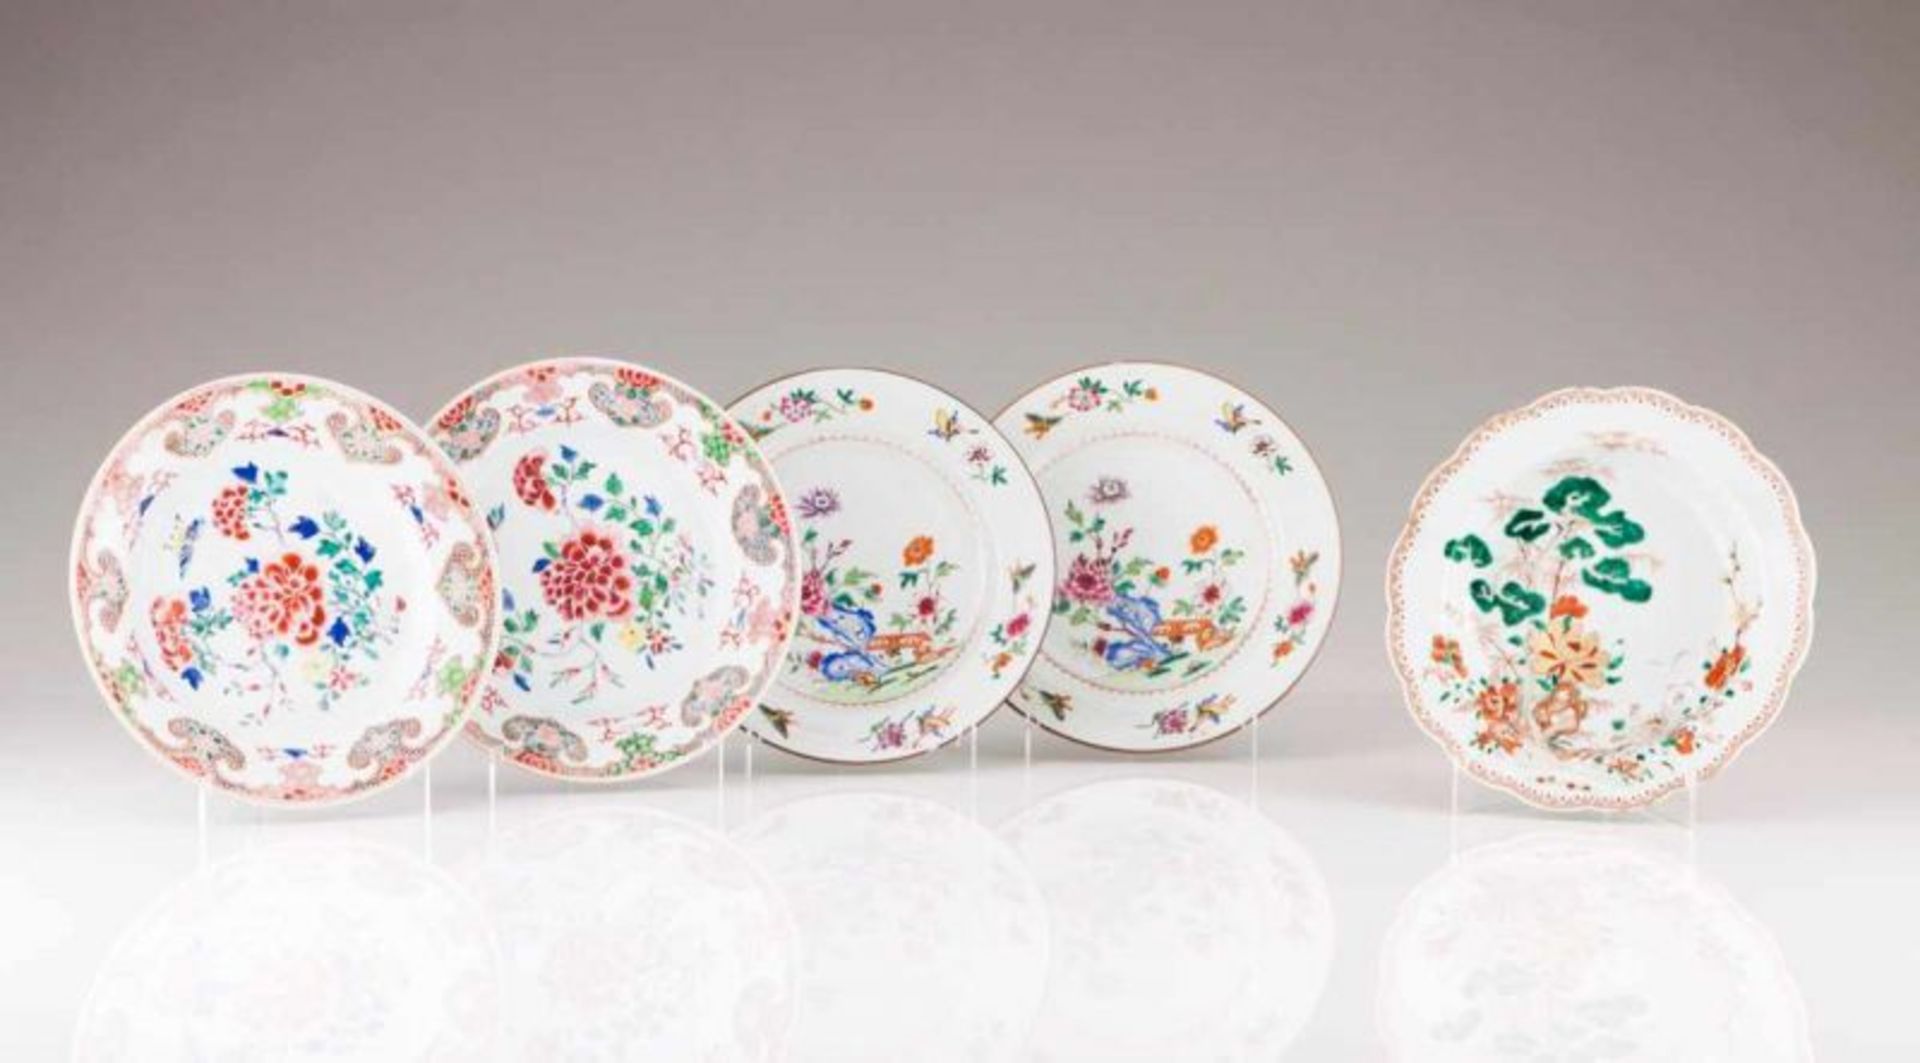 A pair of plates Chinese export porcelain Polychrome and gilt Famille Rose decoration depicting